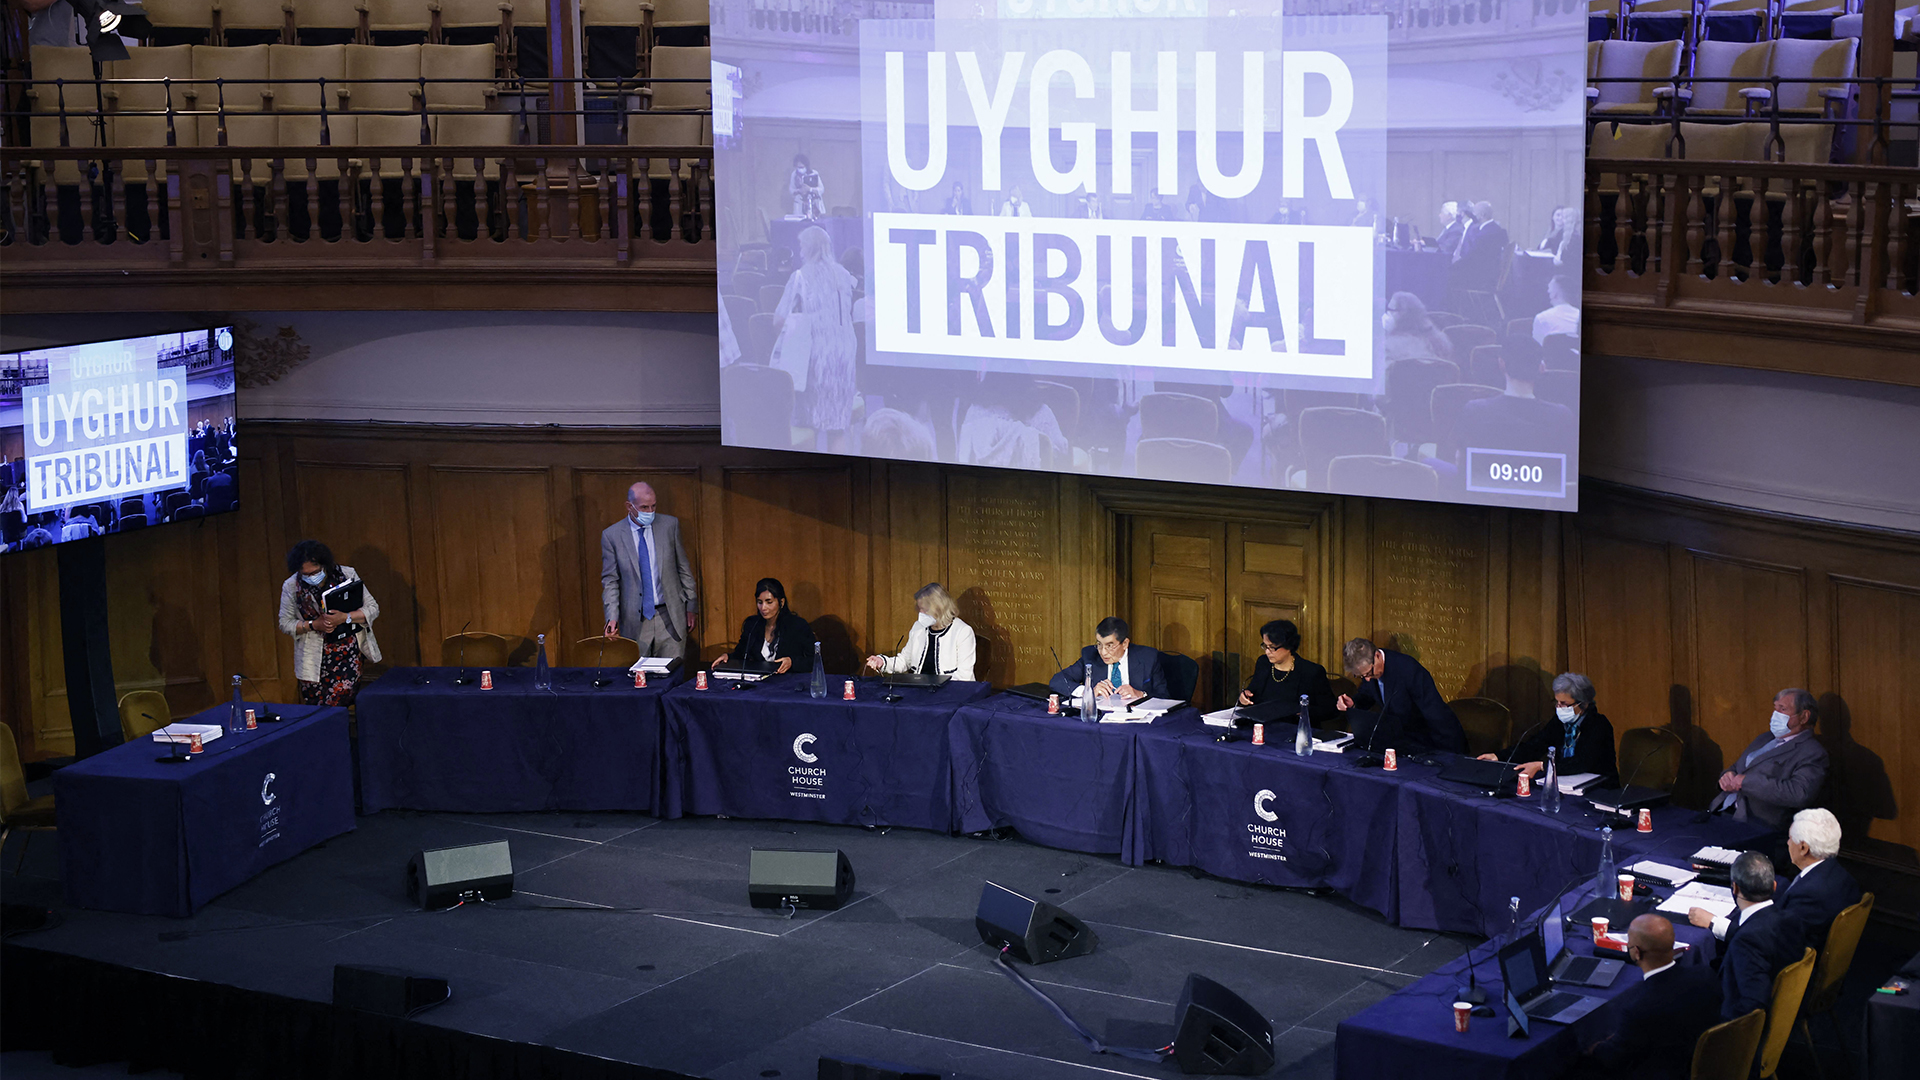 A former police officer testified on Monday at the Uyghur Tribunal, an independent inquiry held in London to investigate China’s alleged genocide an